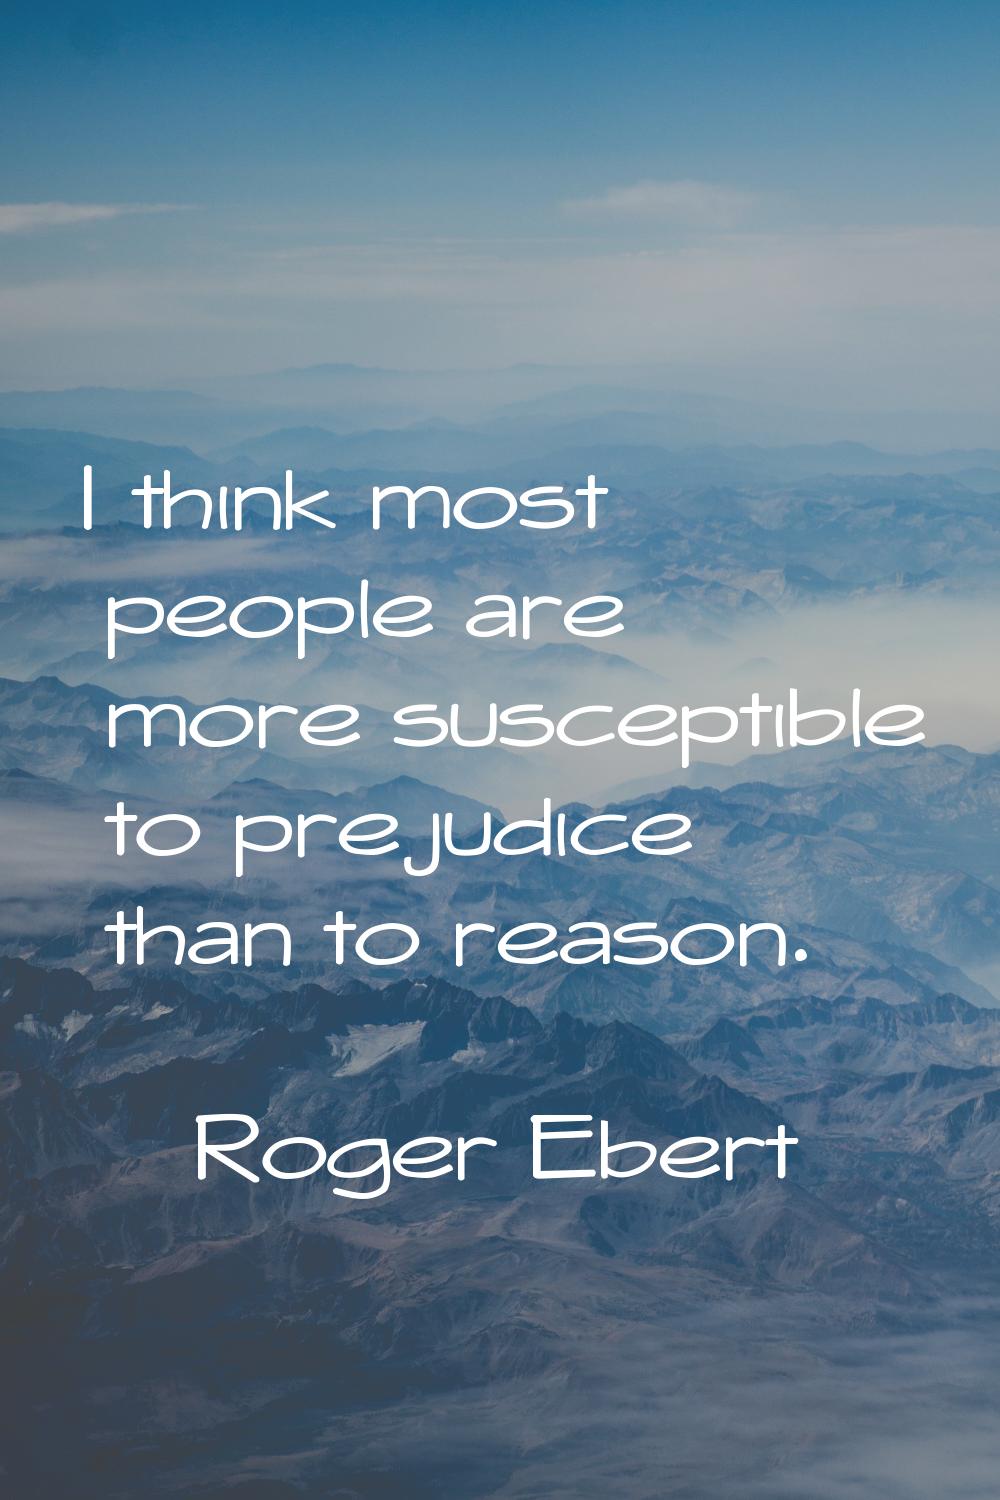 I think most people are more susceptible to prejudice than to reason.